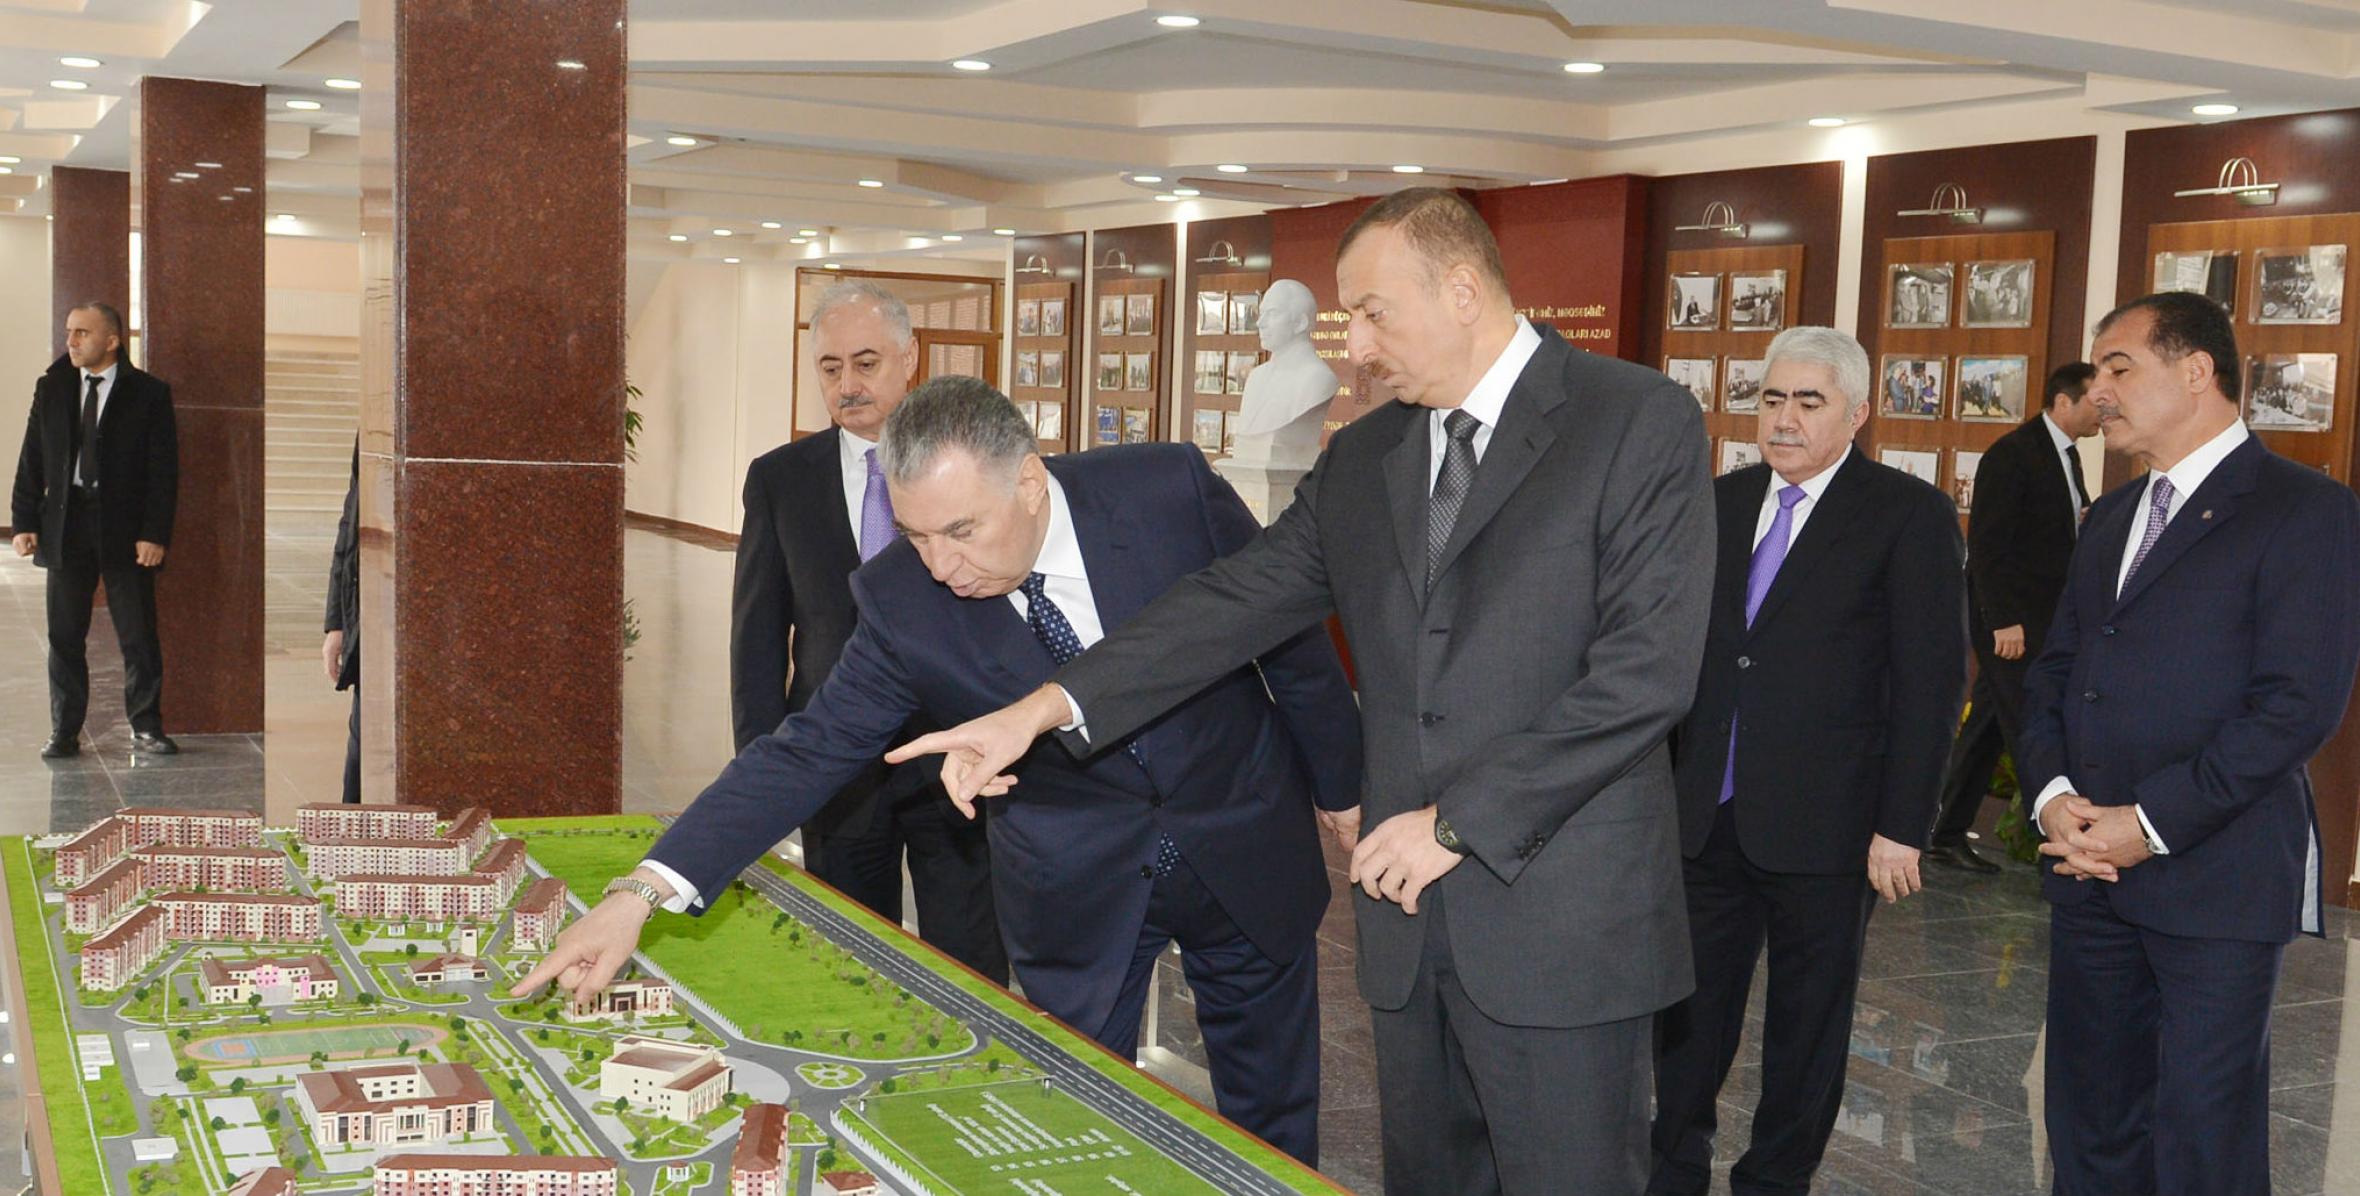 Ilham Aliyev reviewed a new residential settlement built for 1,500 IDP families in Ganja